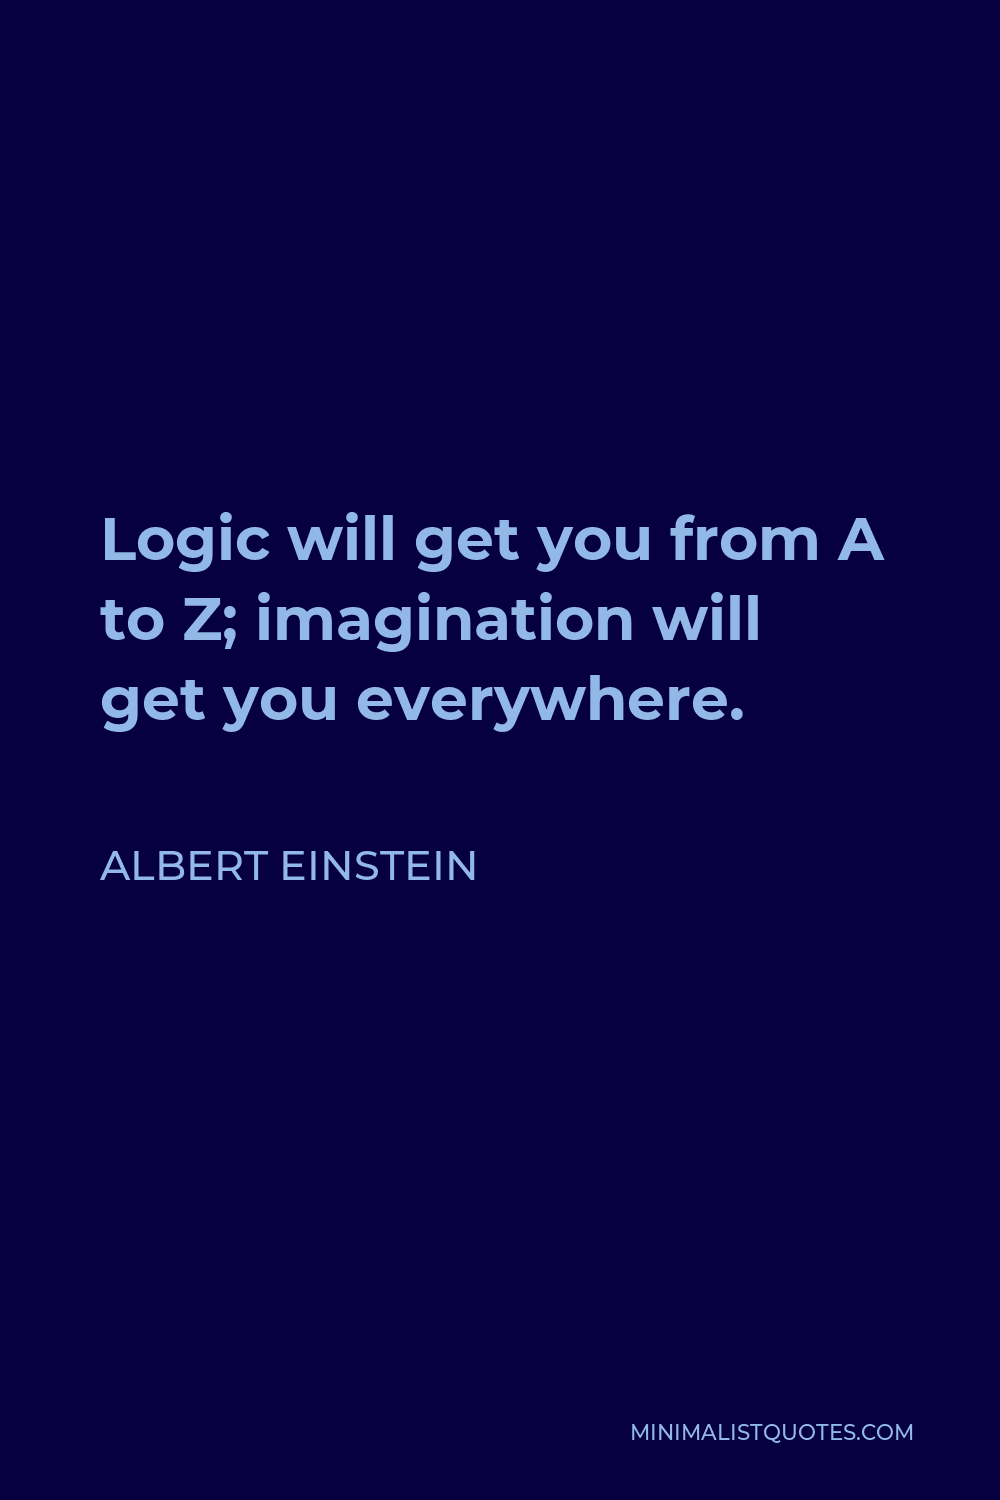 Albert Einstein Quote - Logic will get you from A to Z; imagination will get you everywhere.